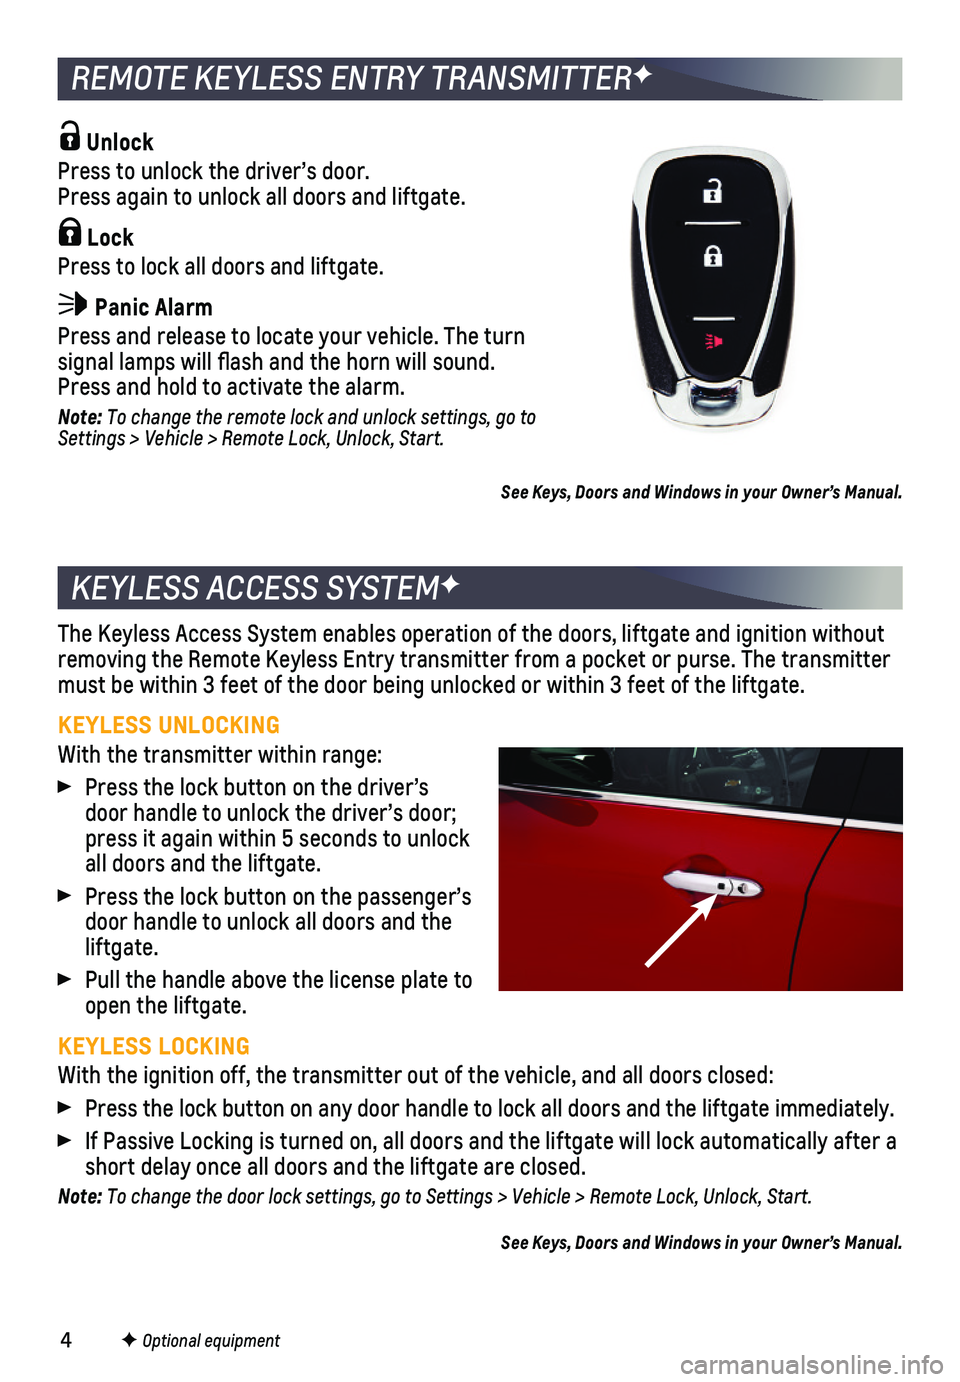 CHEVROLET SPARK 2019  Get To Know Guide 4
KEYLESS ACCESS SYSTEMF
The Keyless Access System enables operation of the doors, liftgate and i\
gnition without removing the Remote Keyless Entry transmitter from a pocket or purse. Th\
e transmitt